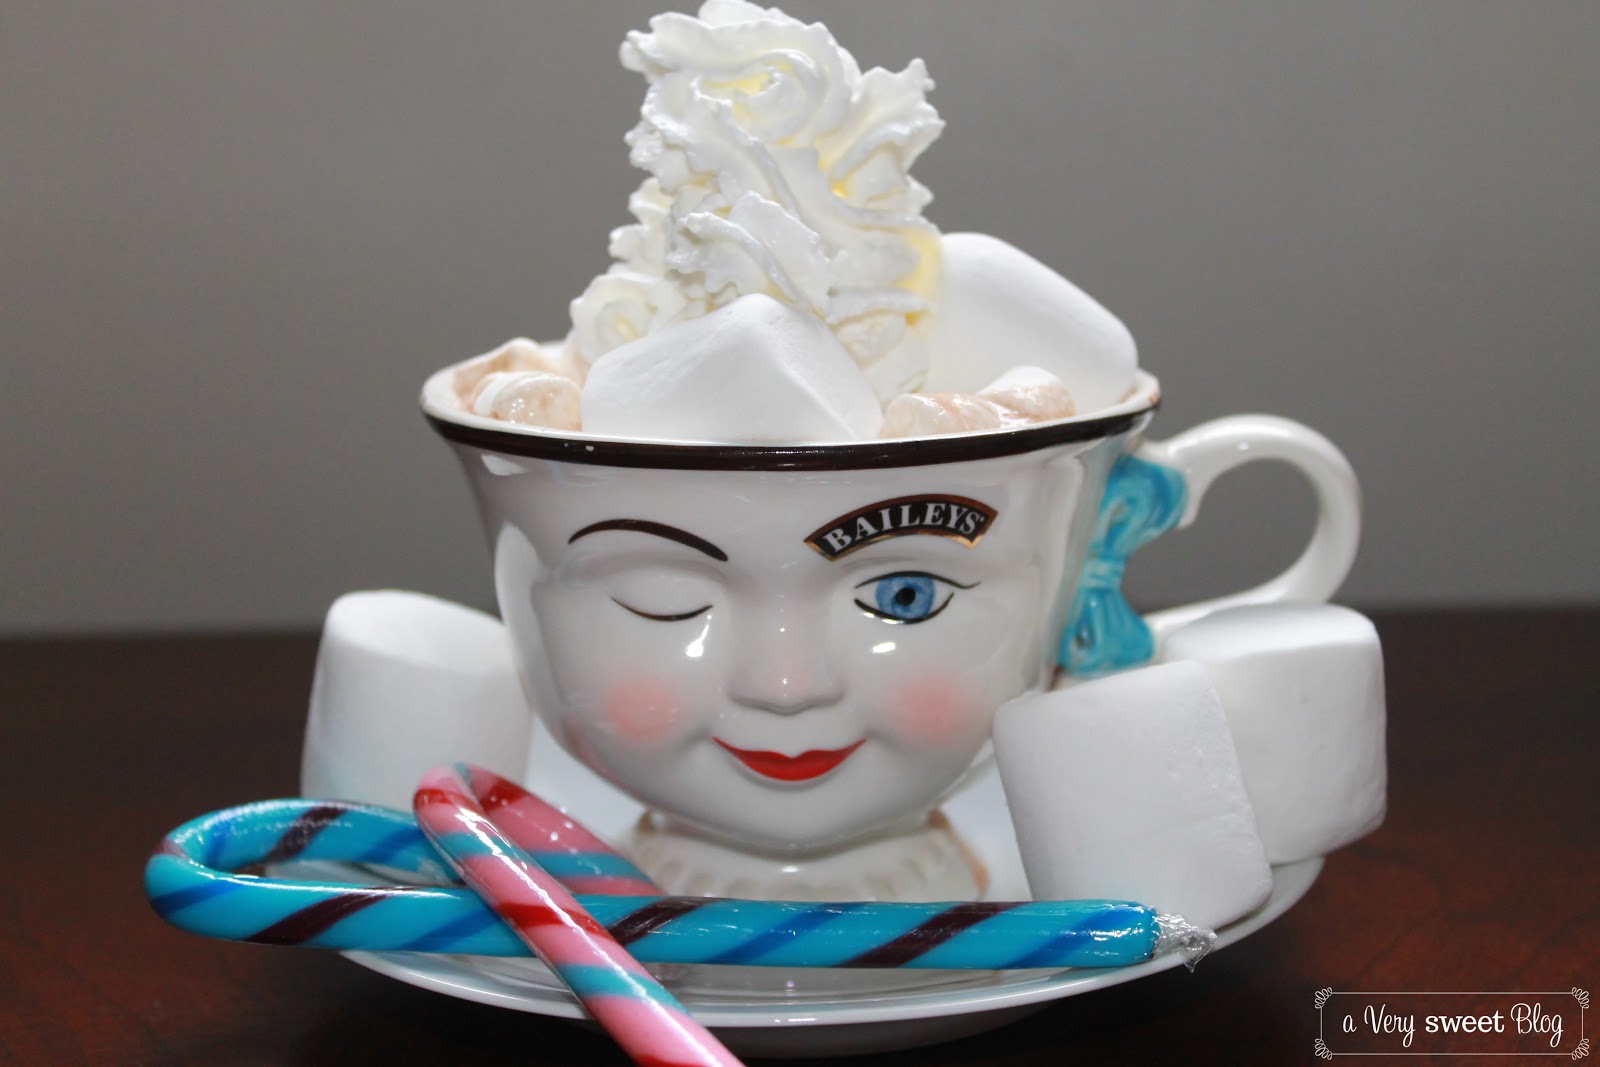 How to Make Marshmallow Snowman for Hot Chocolate